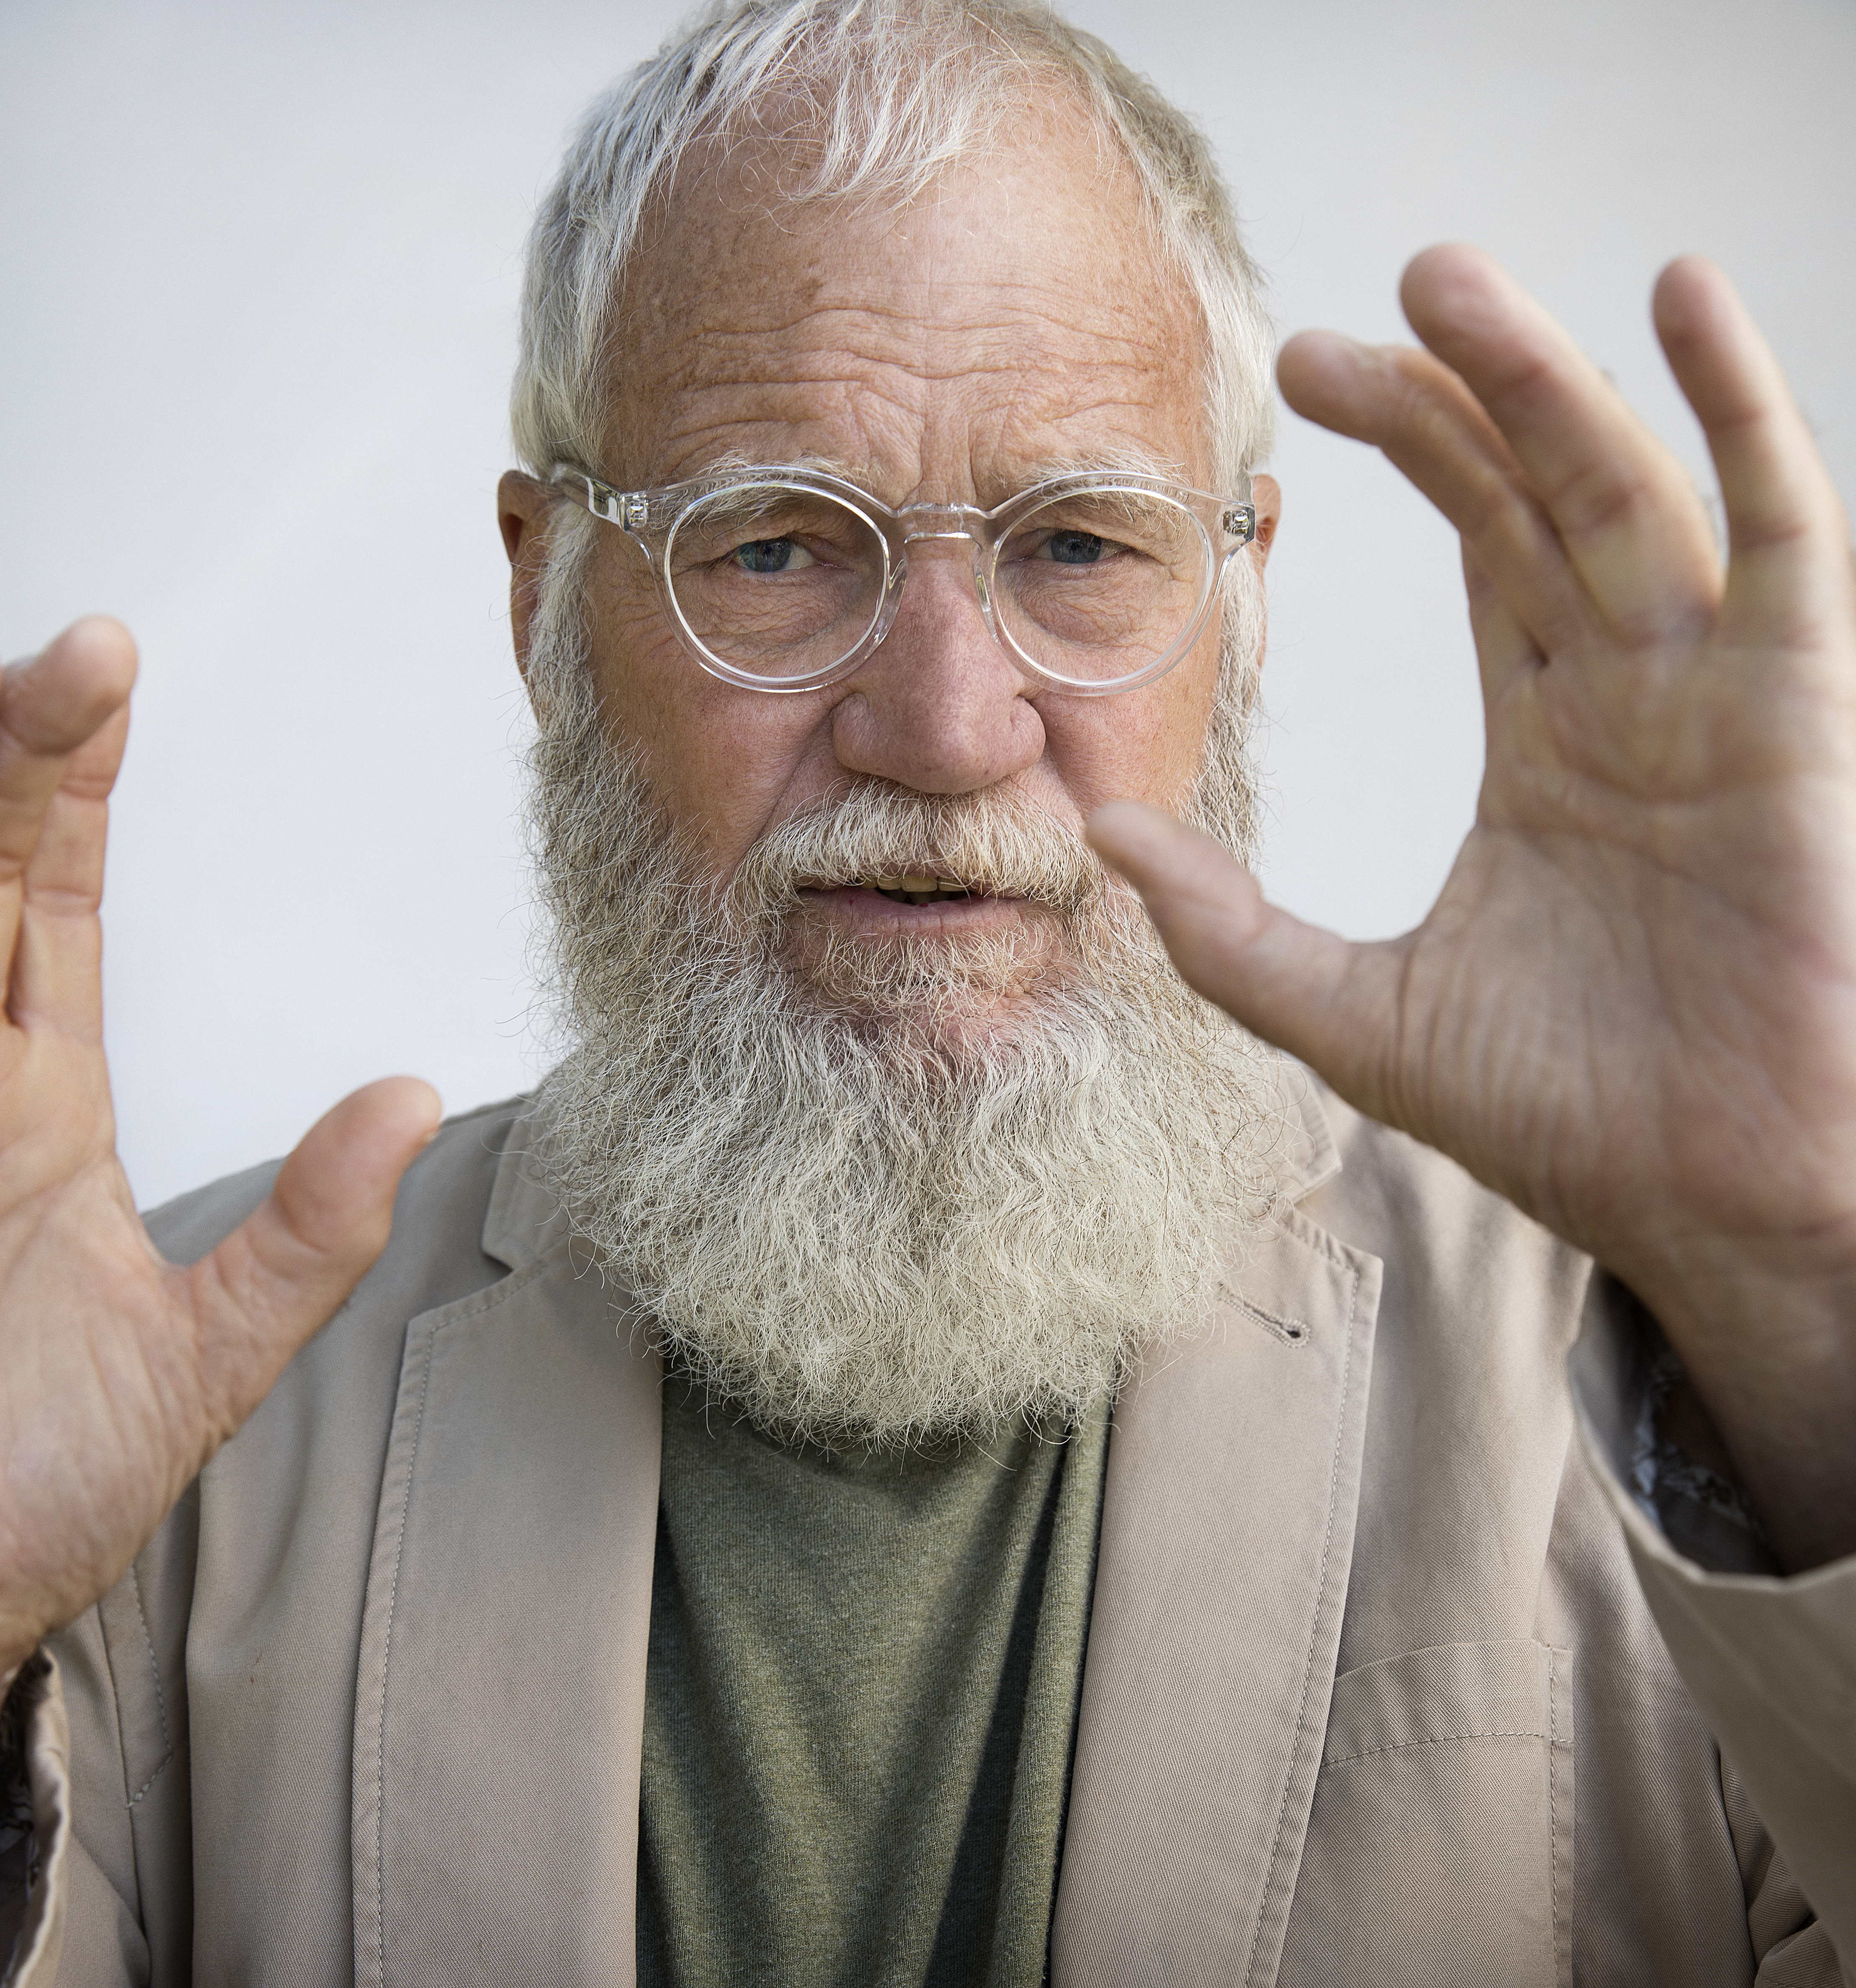 David Letterman, American television host and writer , Photo by Jesse Dittmar for The Washington Post.